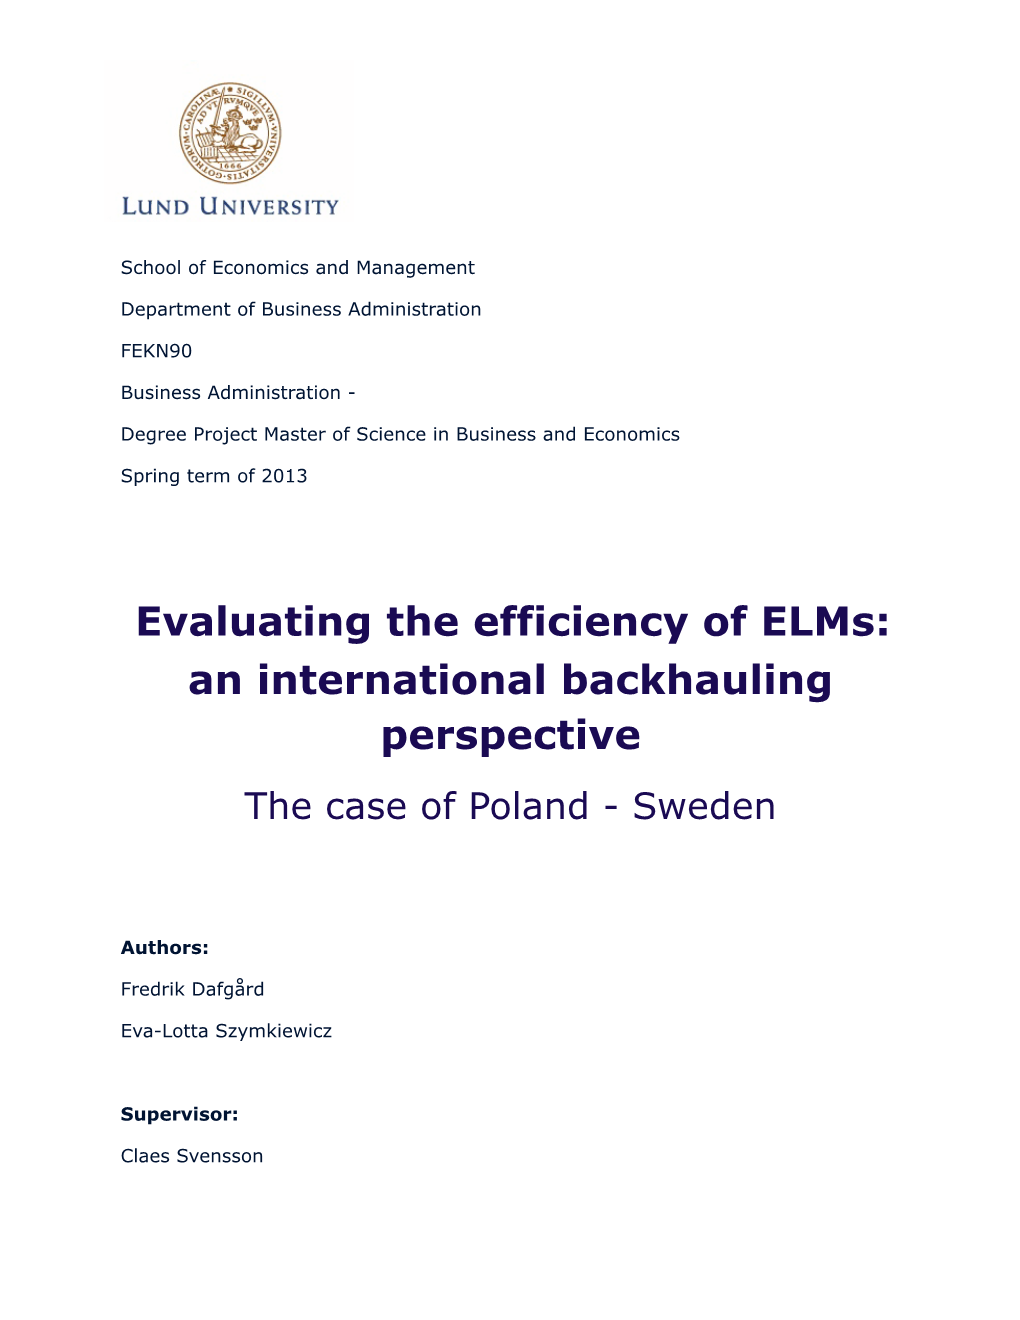 Evaluating the Efficiency of Elms: an International Backhauling Perspective the Case of Poland - Sweden